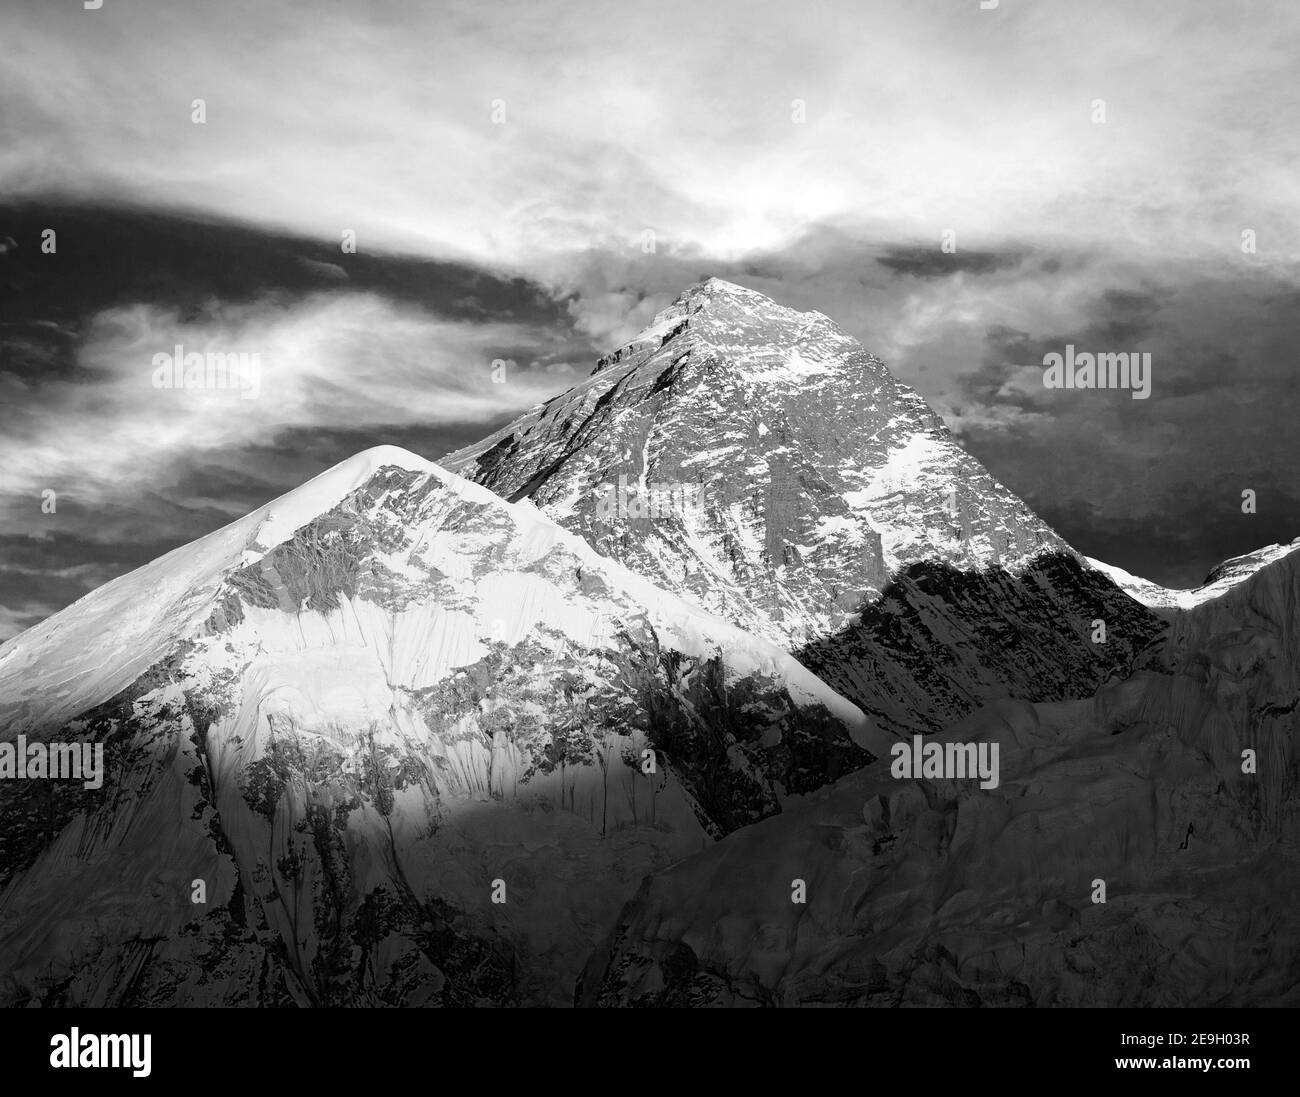 Evening black and white view of Everest from Kala Patthar - trek to Everest base camp - Nepal Stock Photo